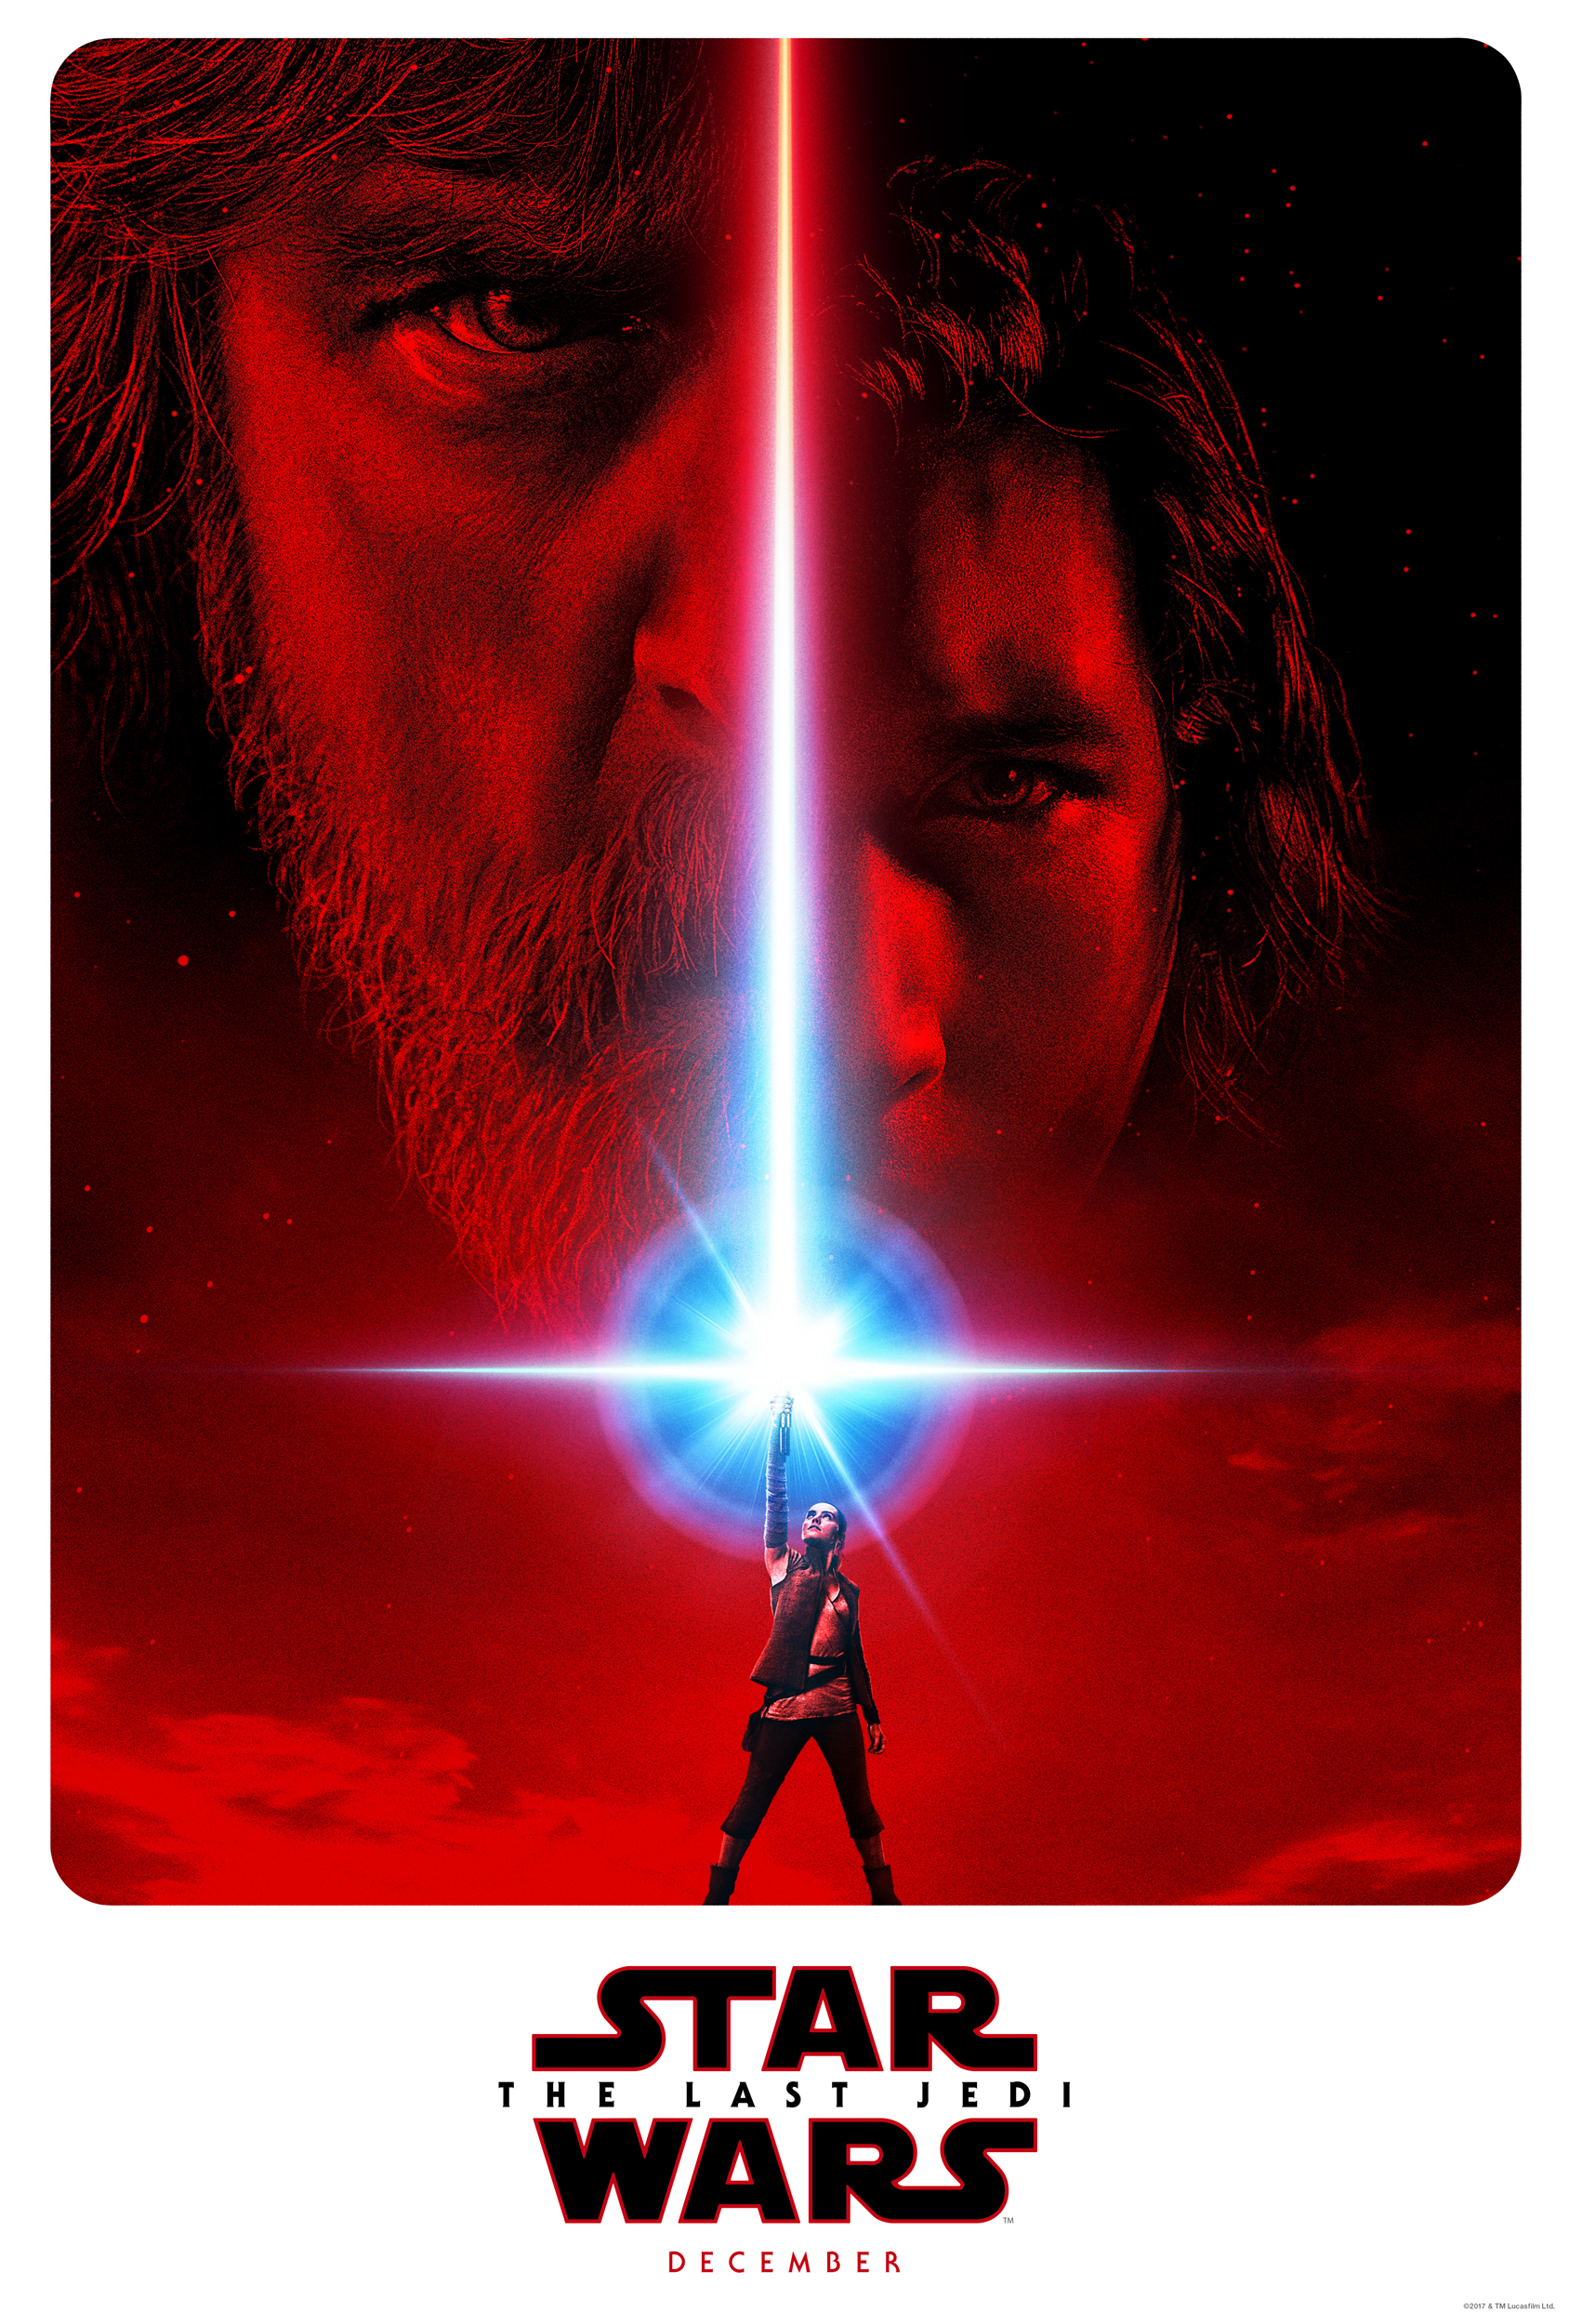 Will the force be with Star Wars: The Last Jedi?